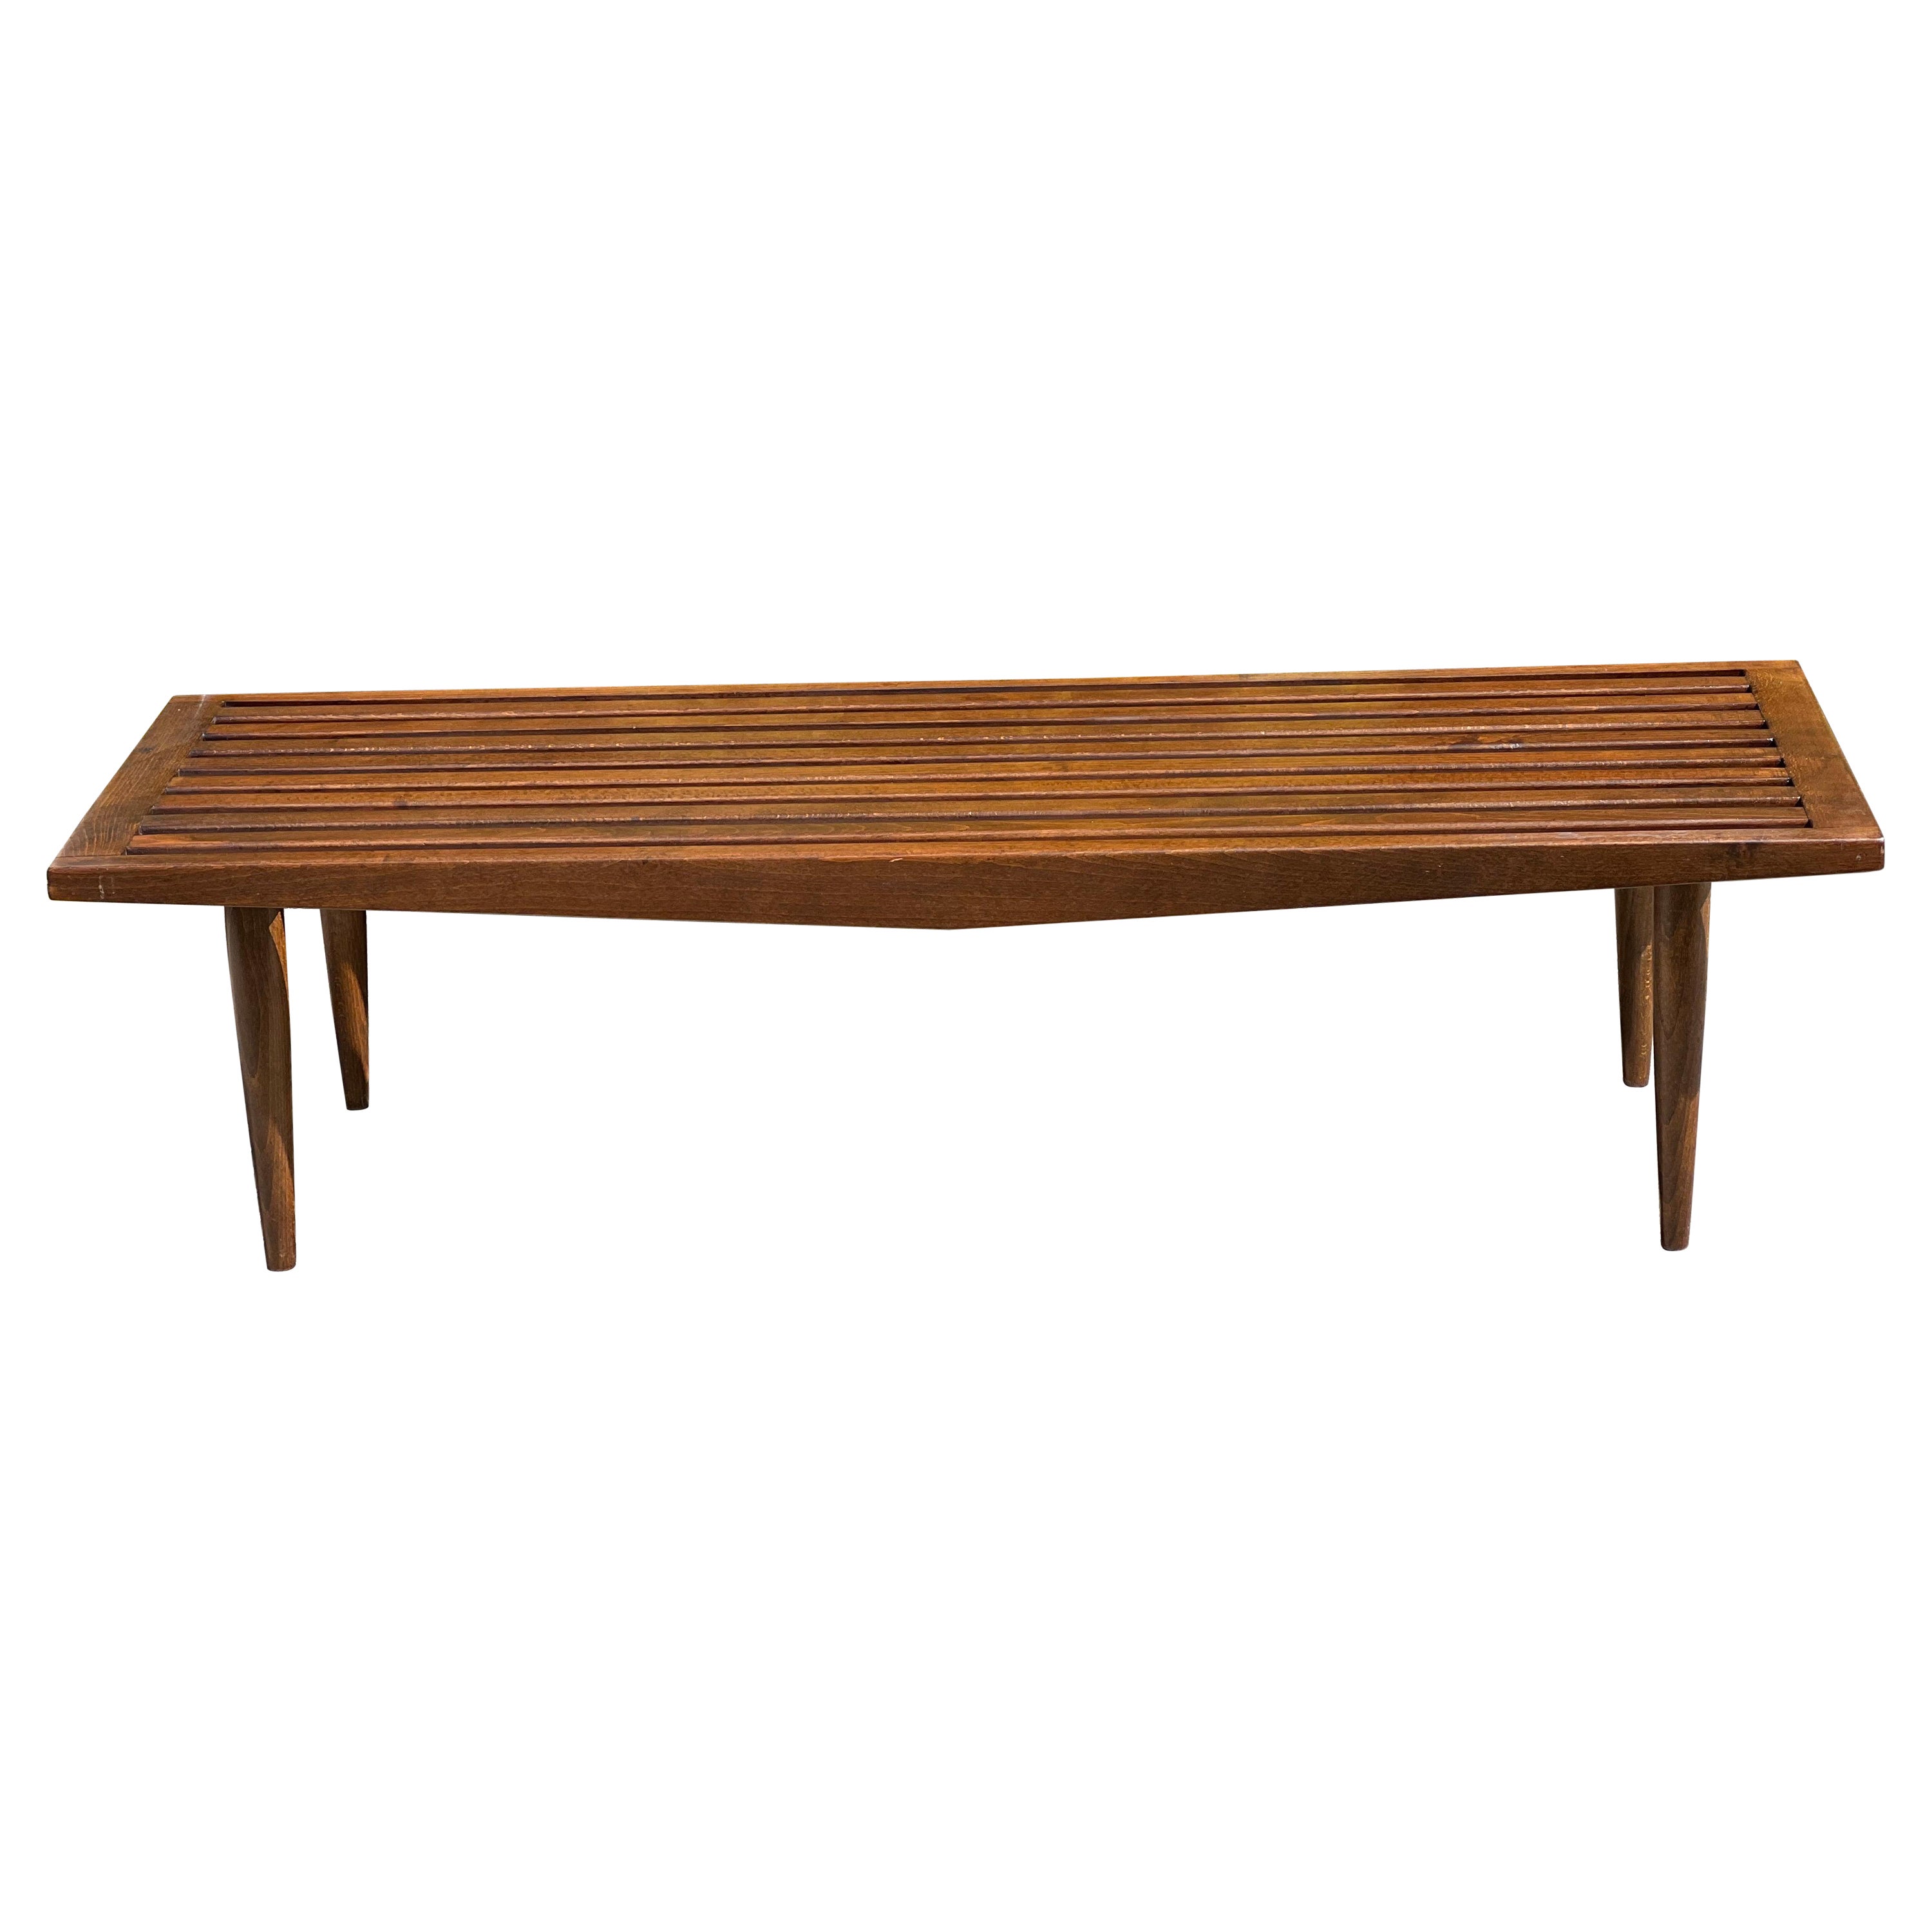 Vintage Mid-Century Modern Slat Bench or Coffee Table